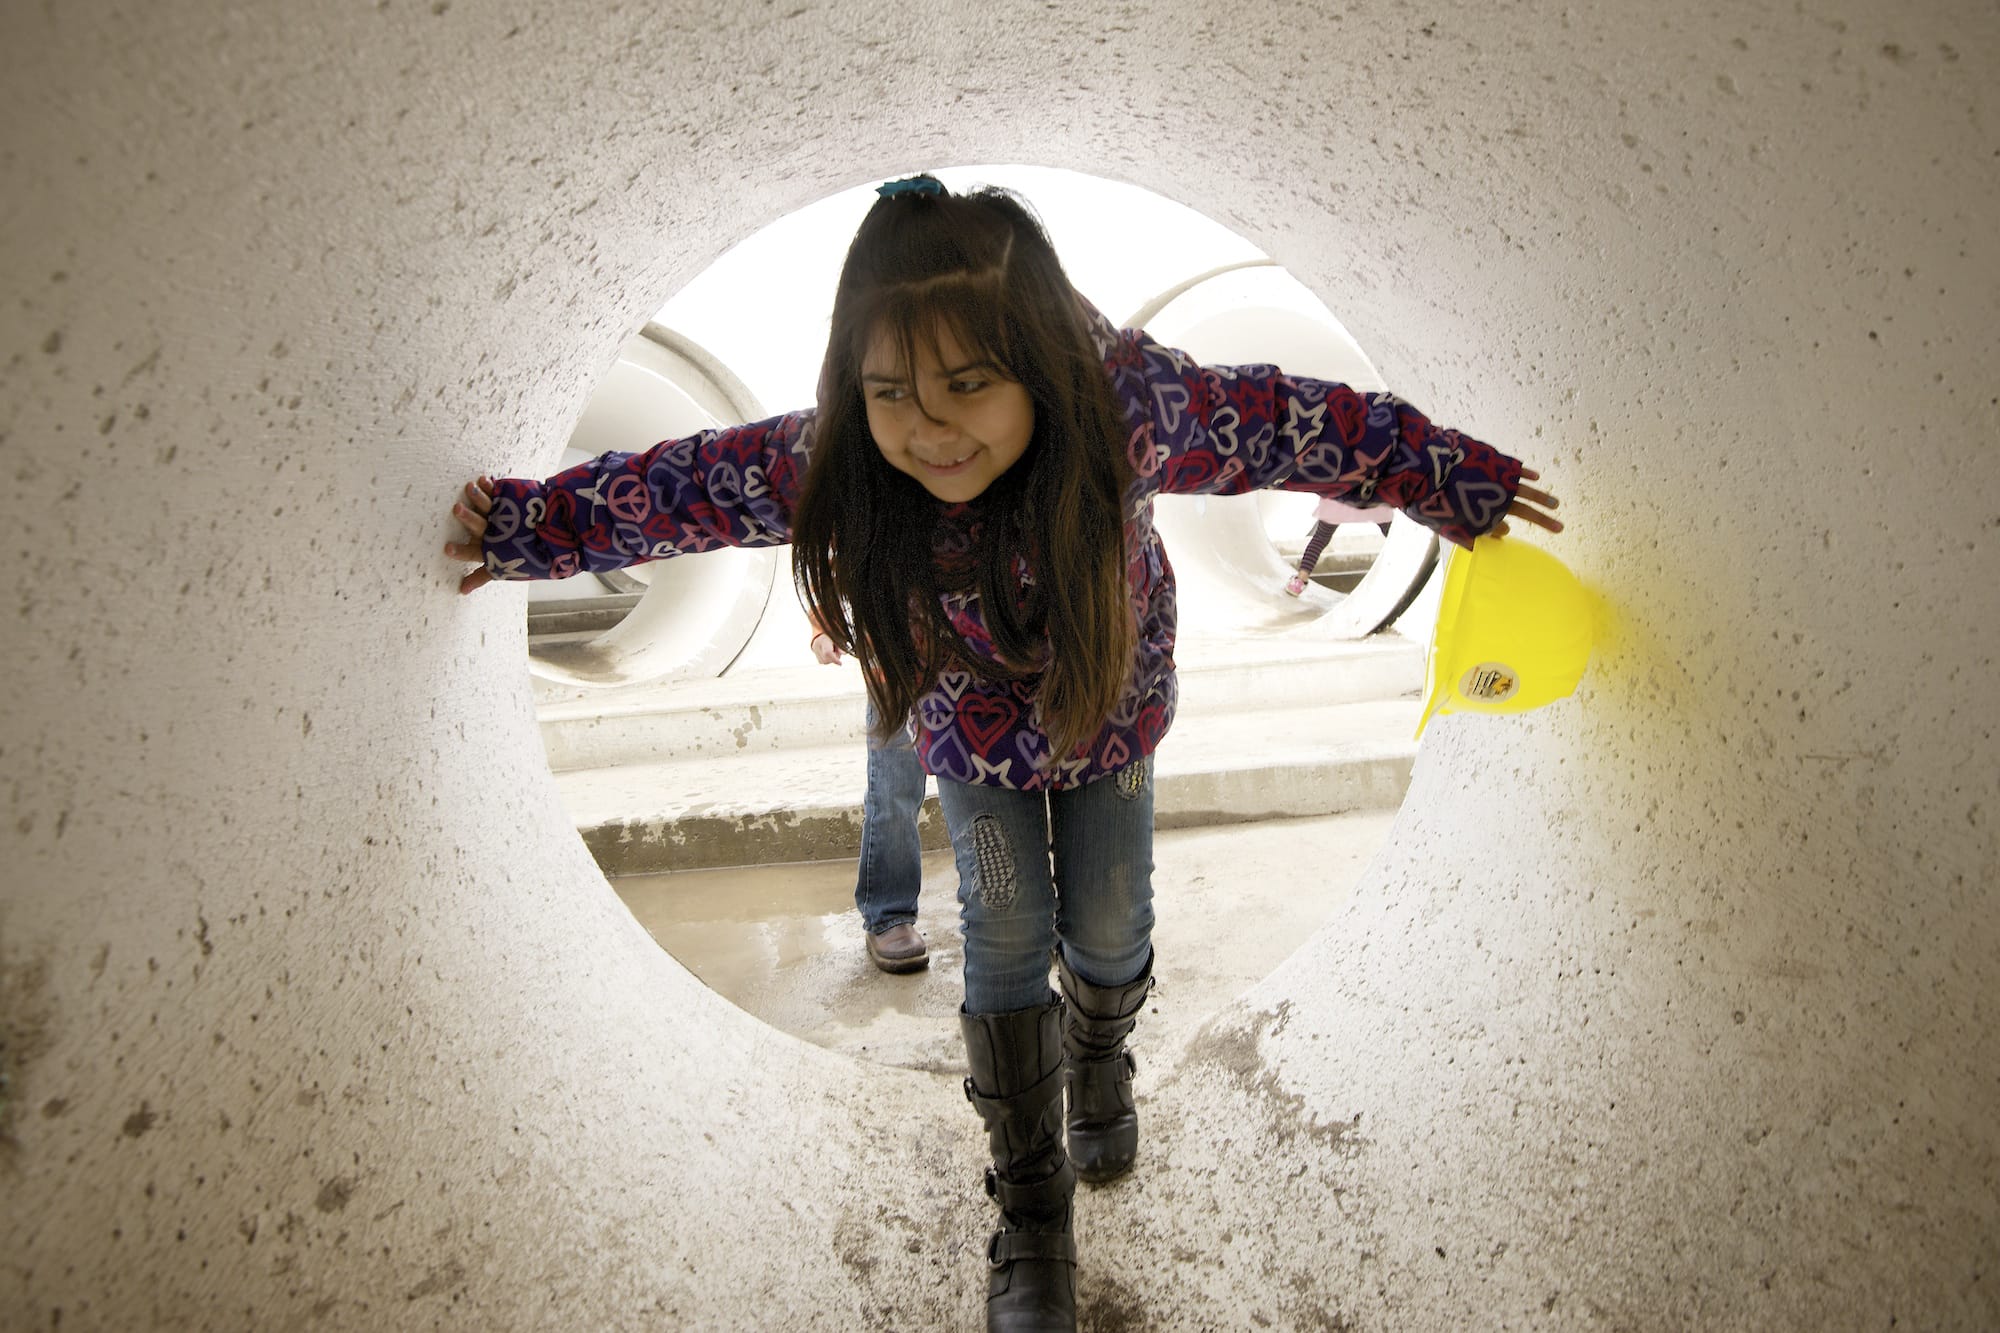 Columbian files
Litzy Ortega-Diaz enjoys a tunnel maze at the 2013 Dozer Day event in Vancouver.